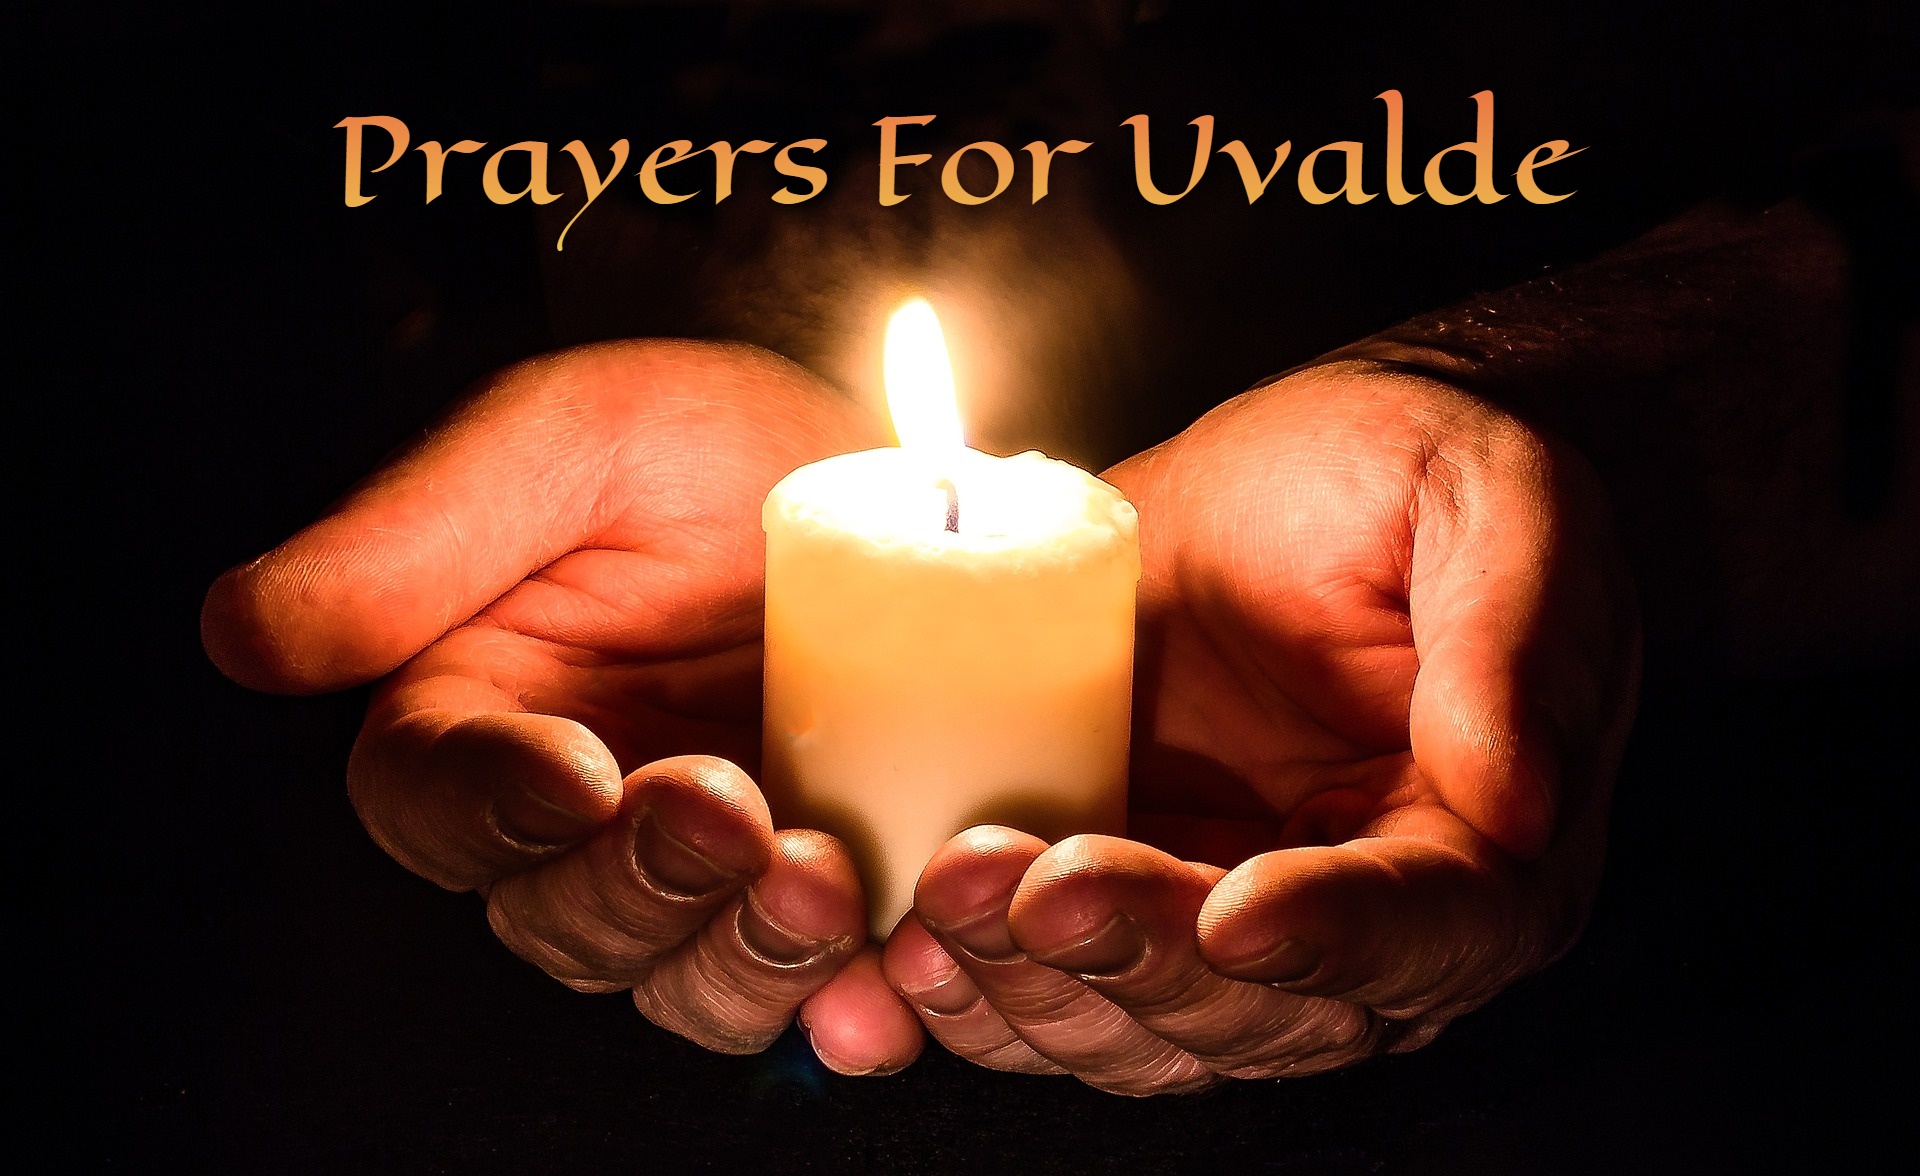 Prayers For Uvalde - Help Us Unite As One Community Through Difficult Times